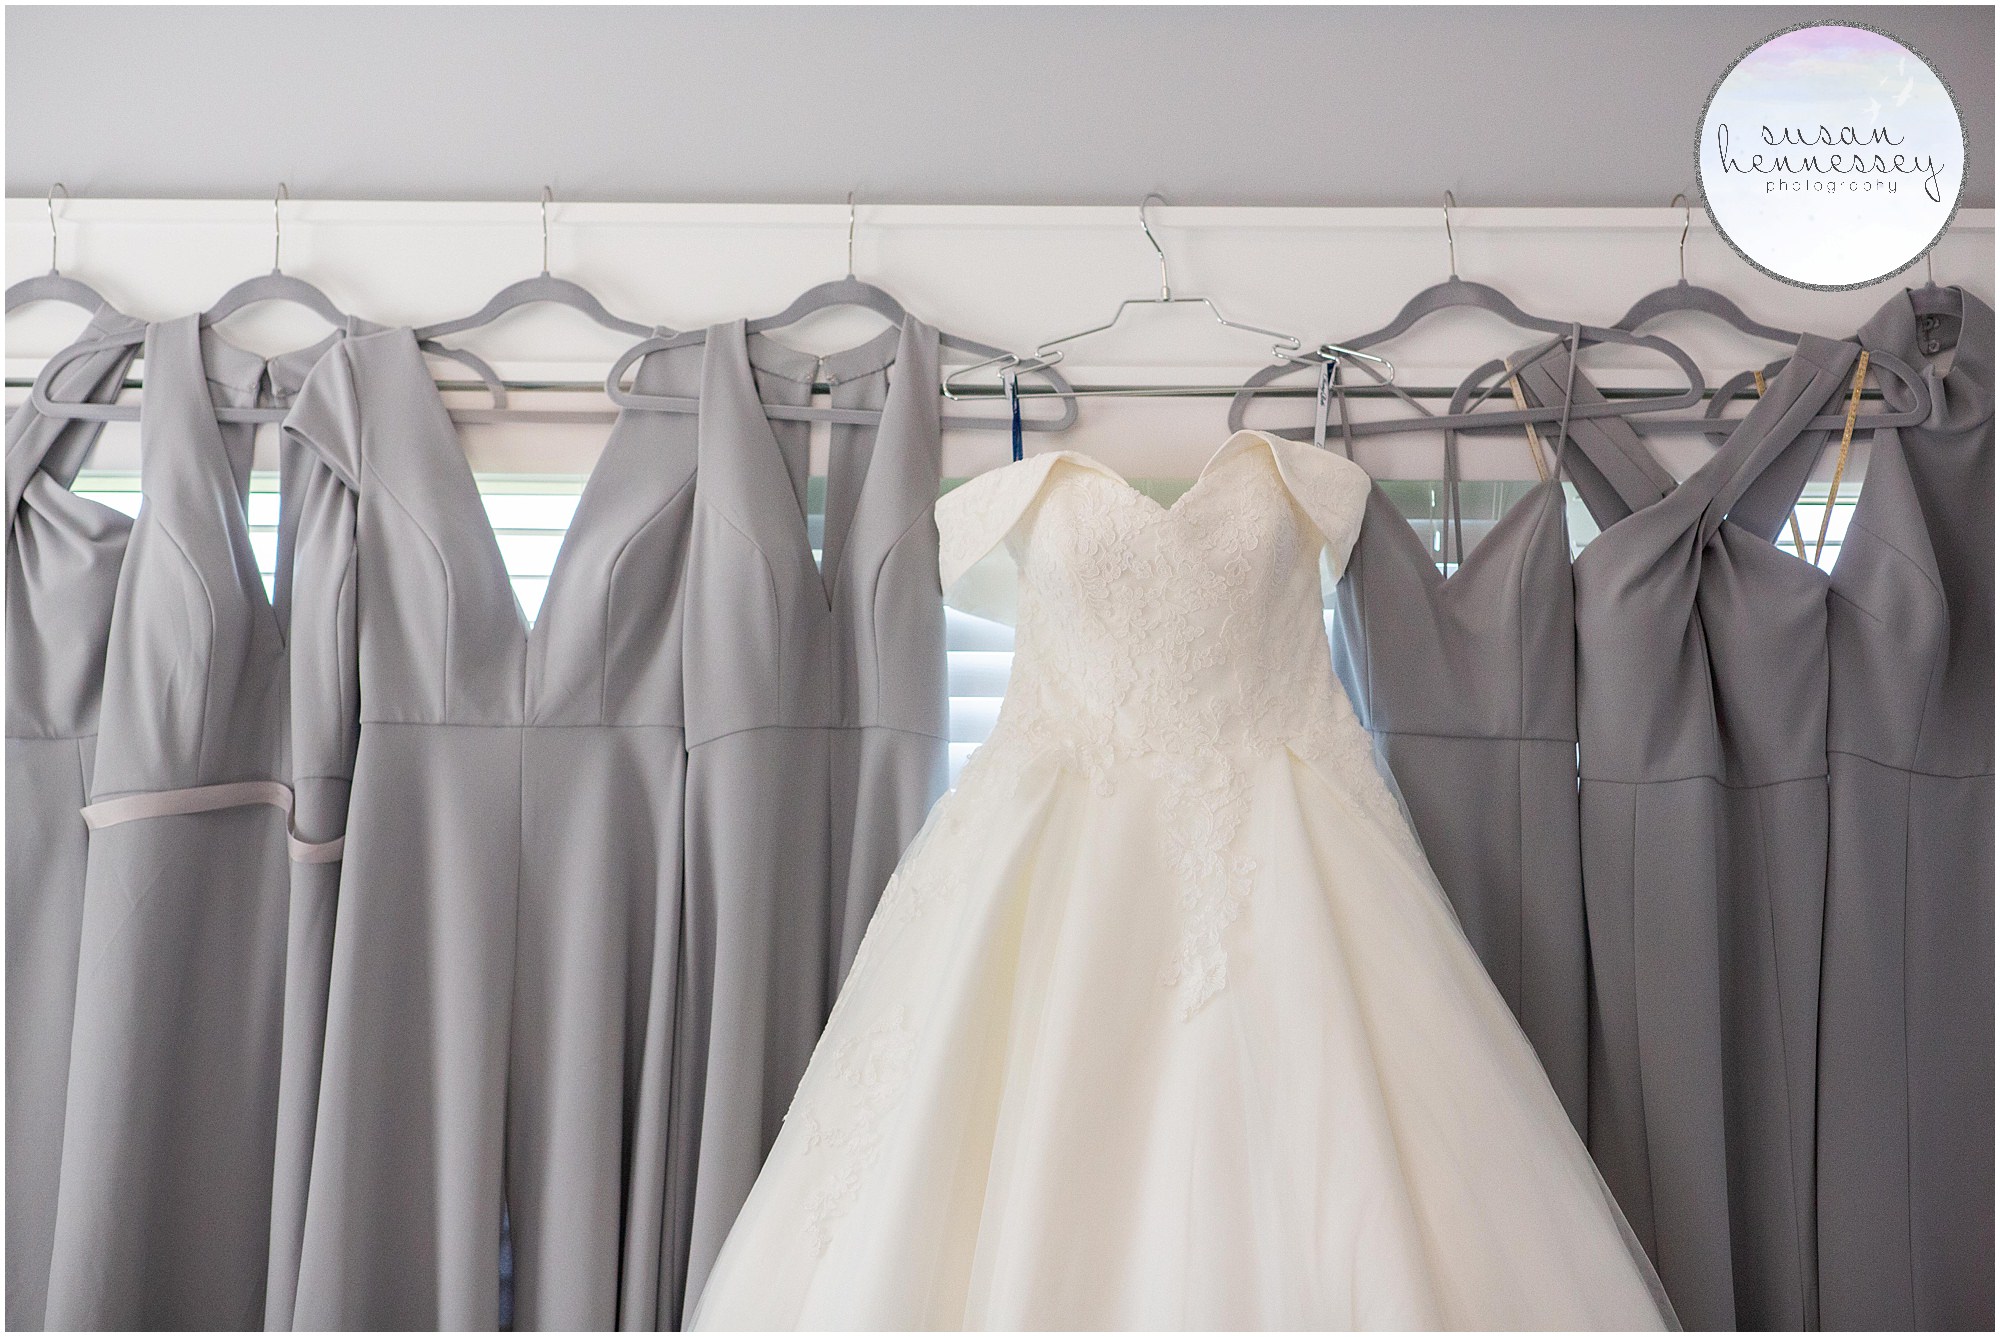 Bride's lace Kleinfeld's dress and gray bridesmaid dresses